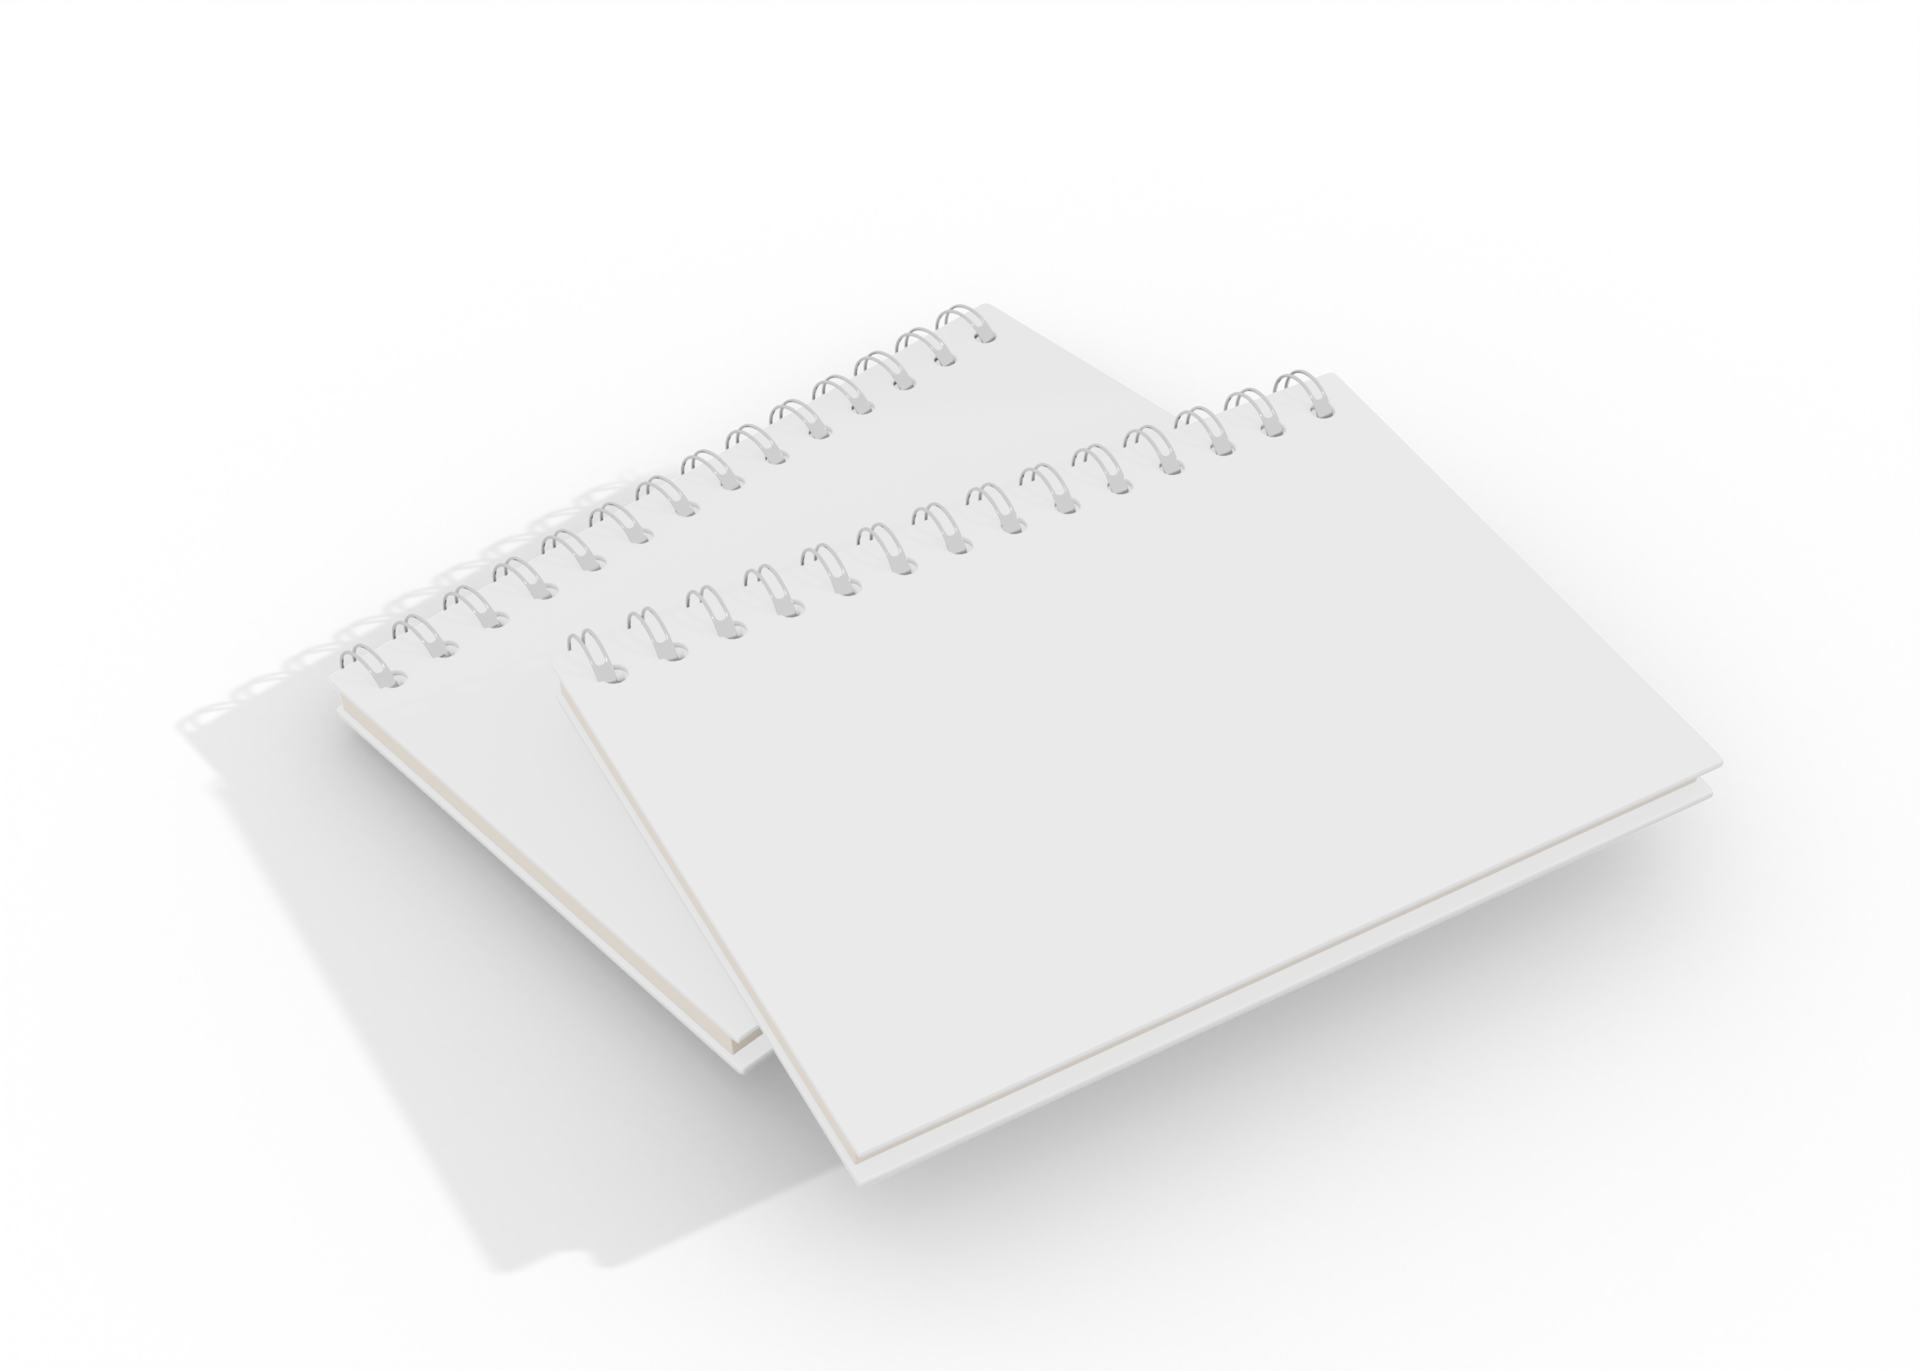 White Notebook mockup 24241968 PNG